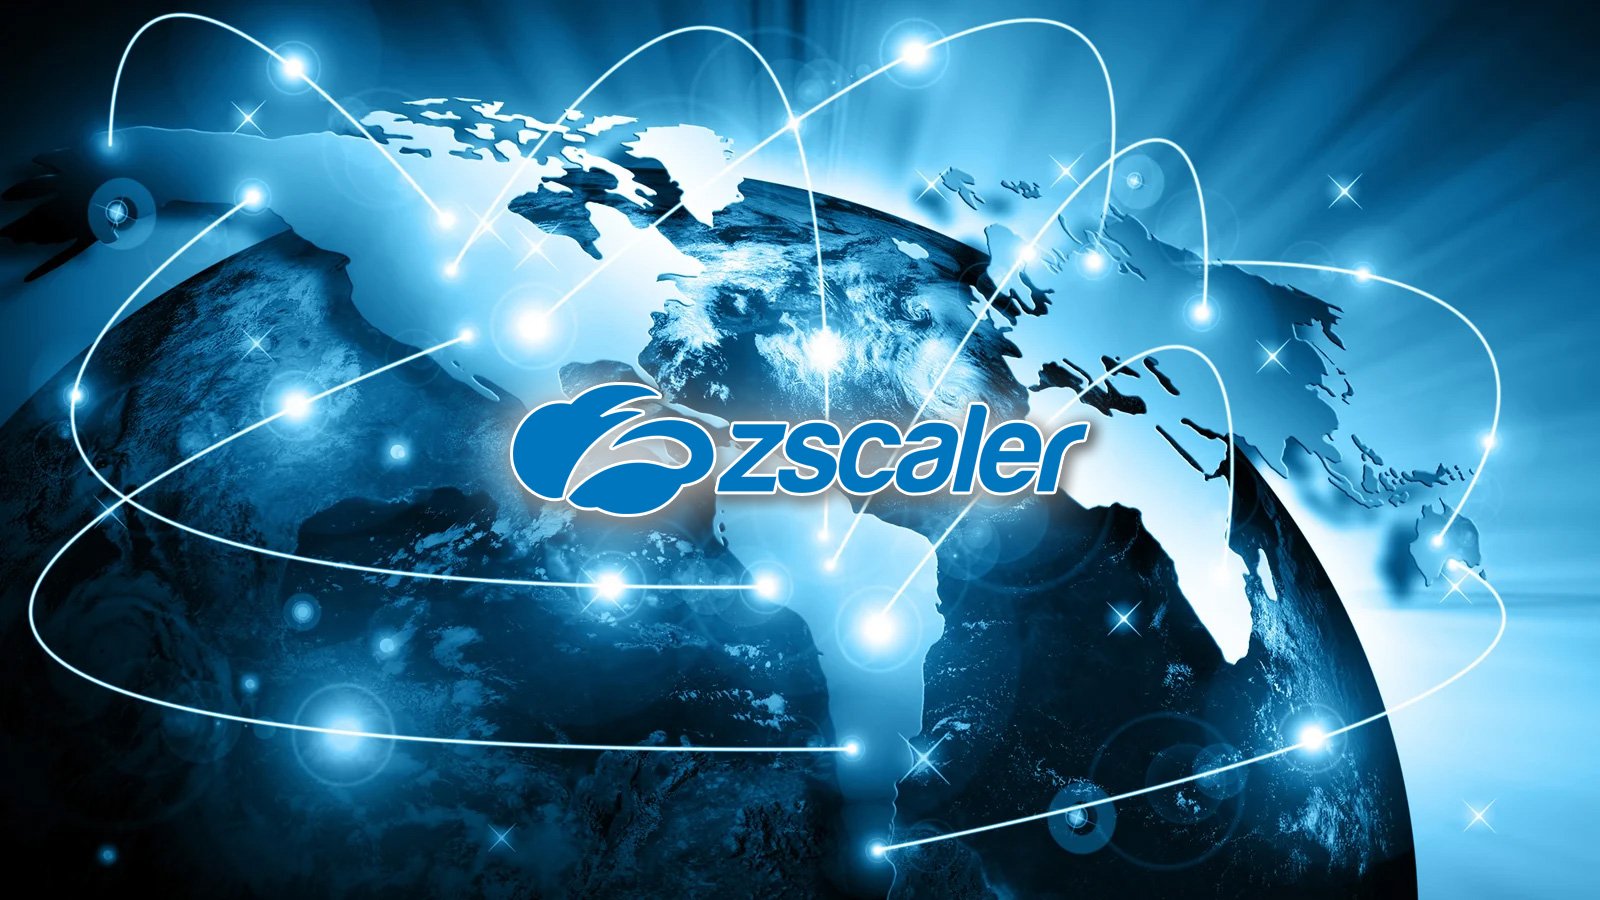 Zscaler takes "test environment" offline after rumors of a breach